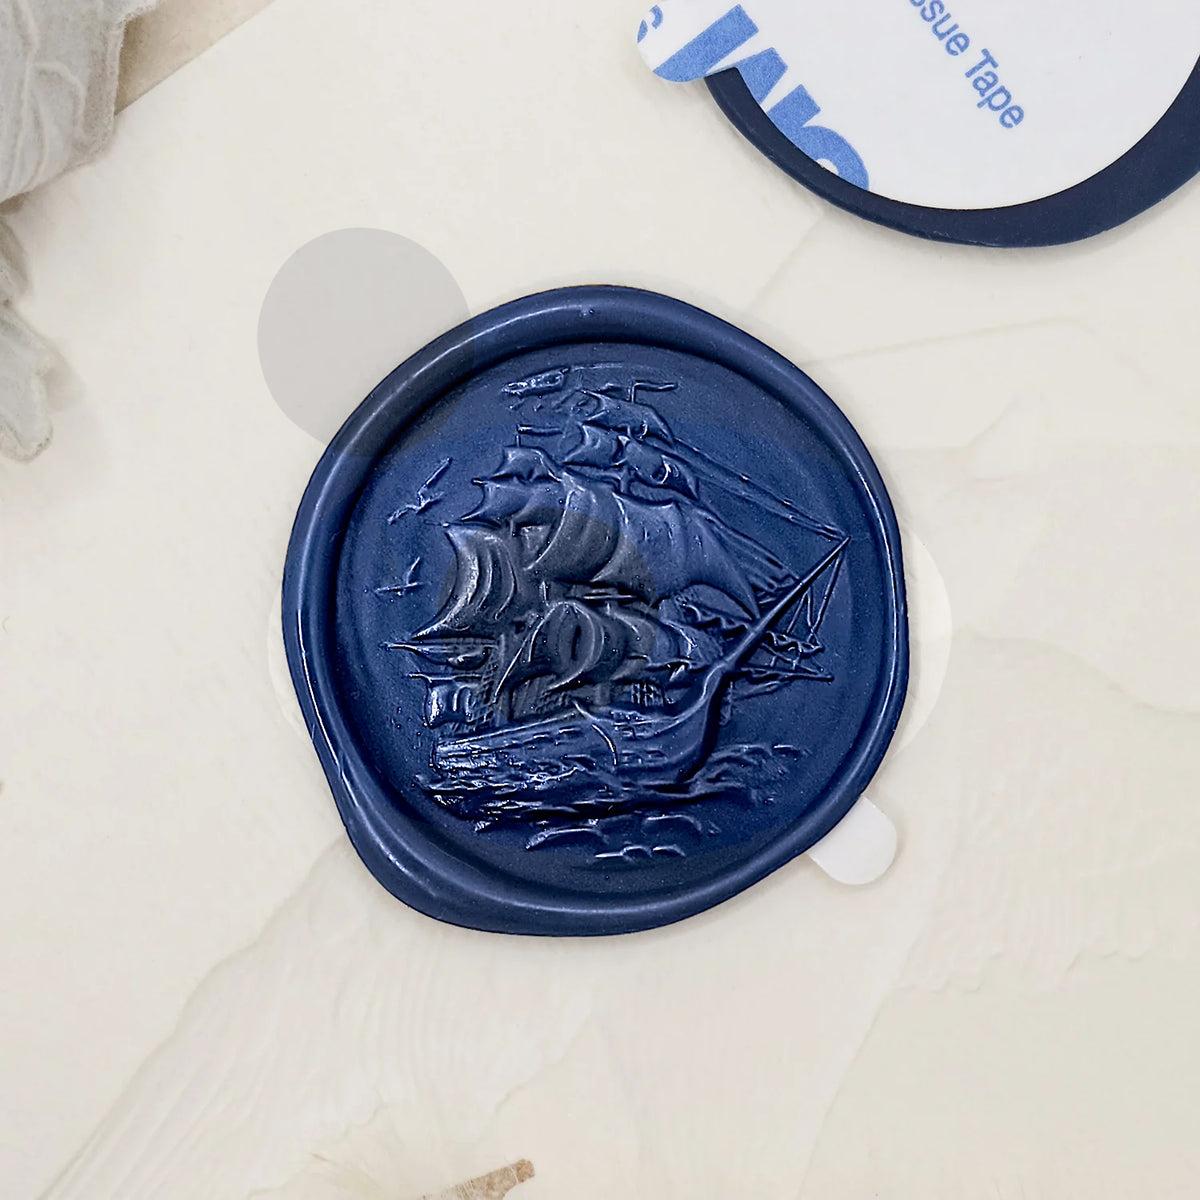 3D Relief Sailing Ship Self-adhesive Wax Seal Stickers 5-4